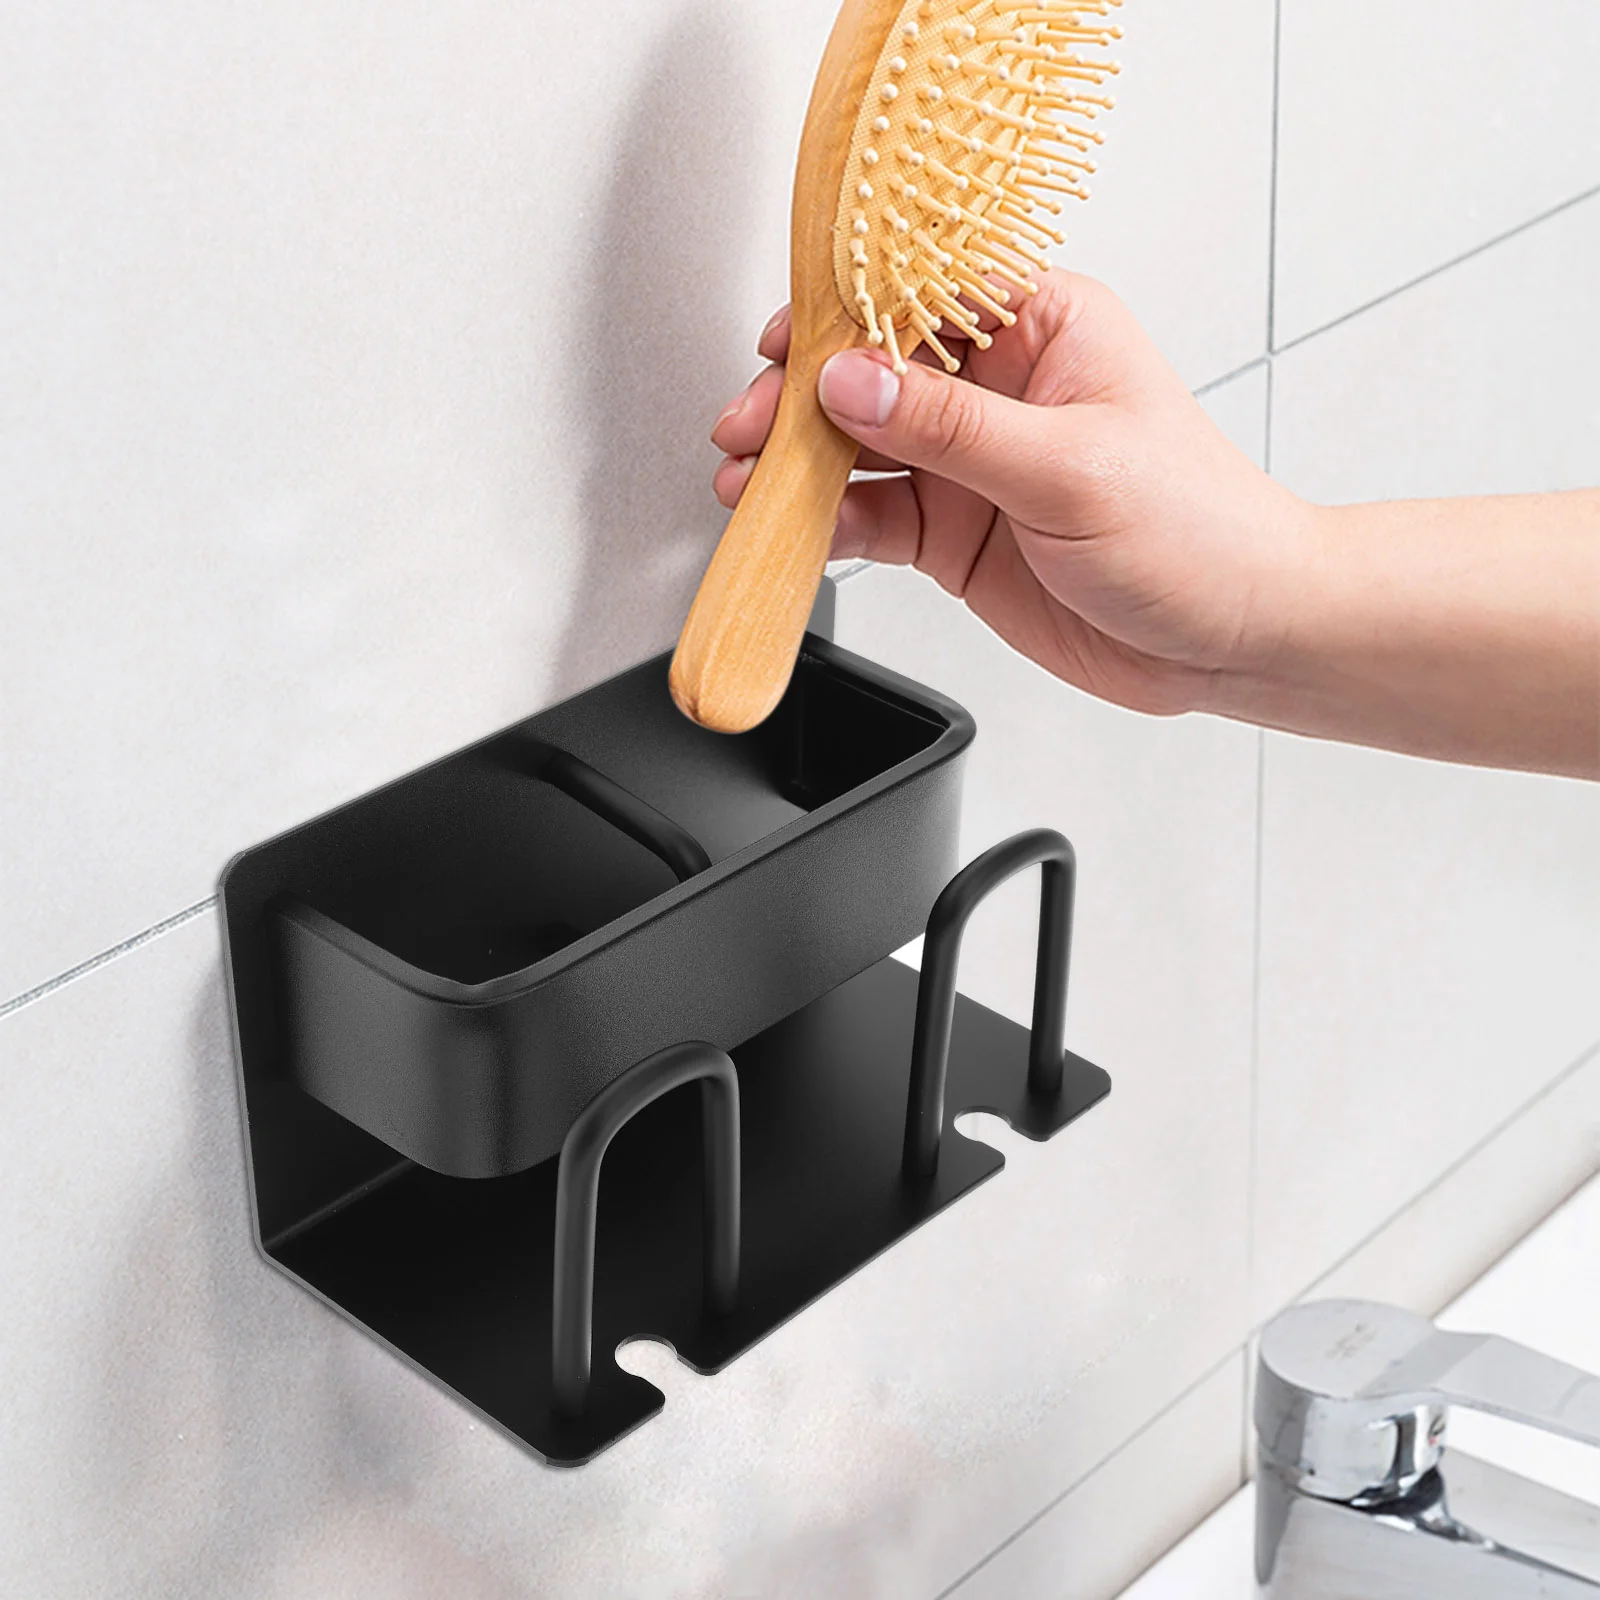 Punch-free Cup Holder Electric Toothpaste Rack Toothpaste Holder Wall Mounted Self Black Makeup Brushes